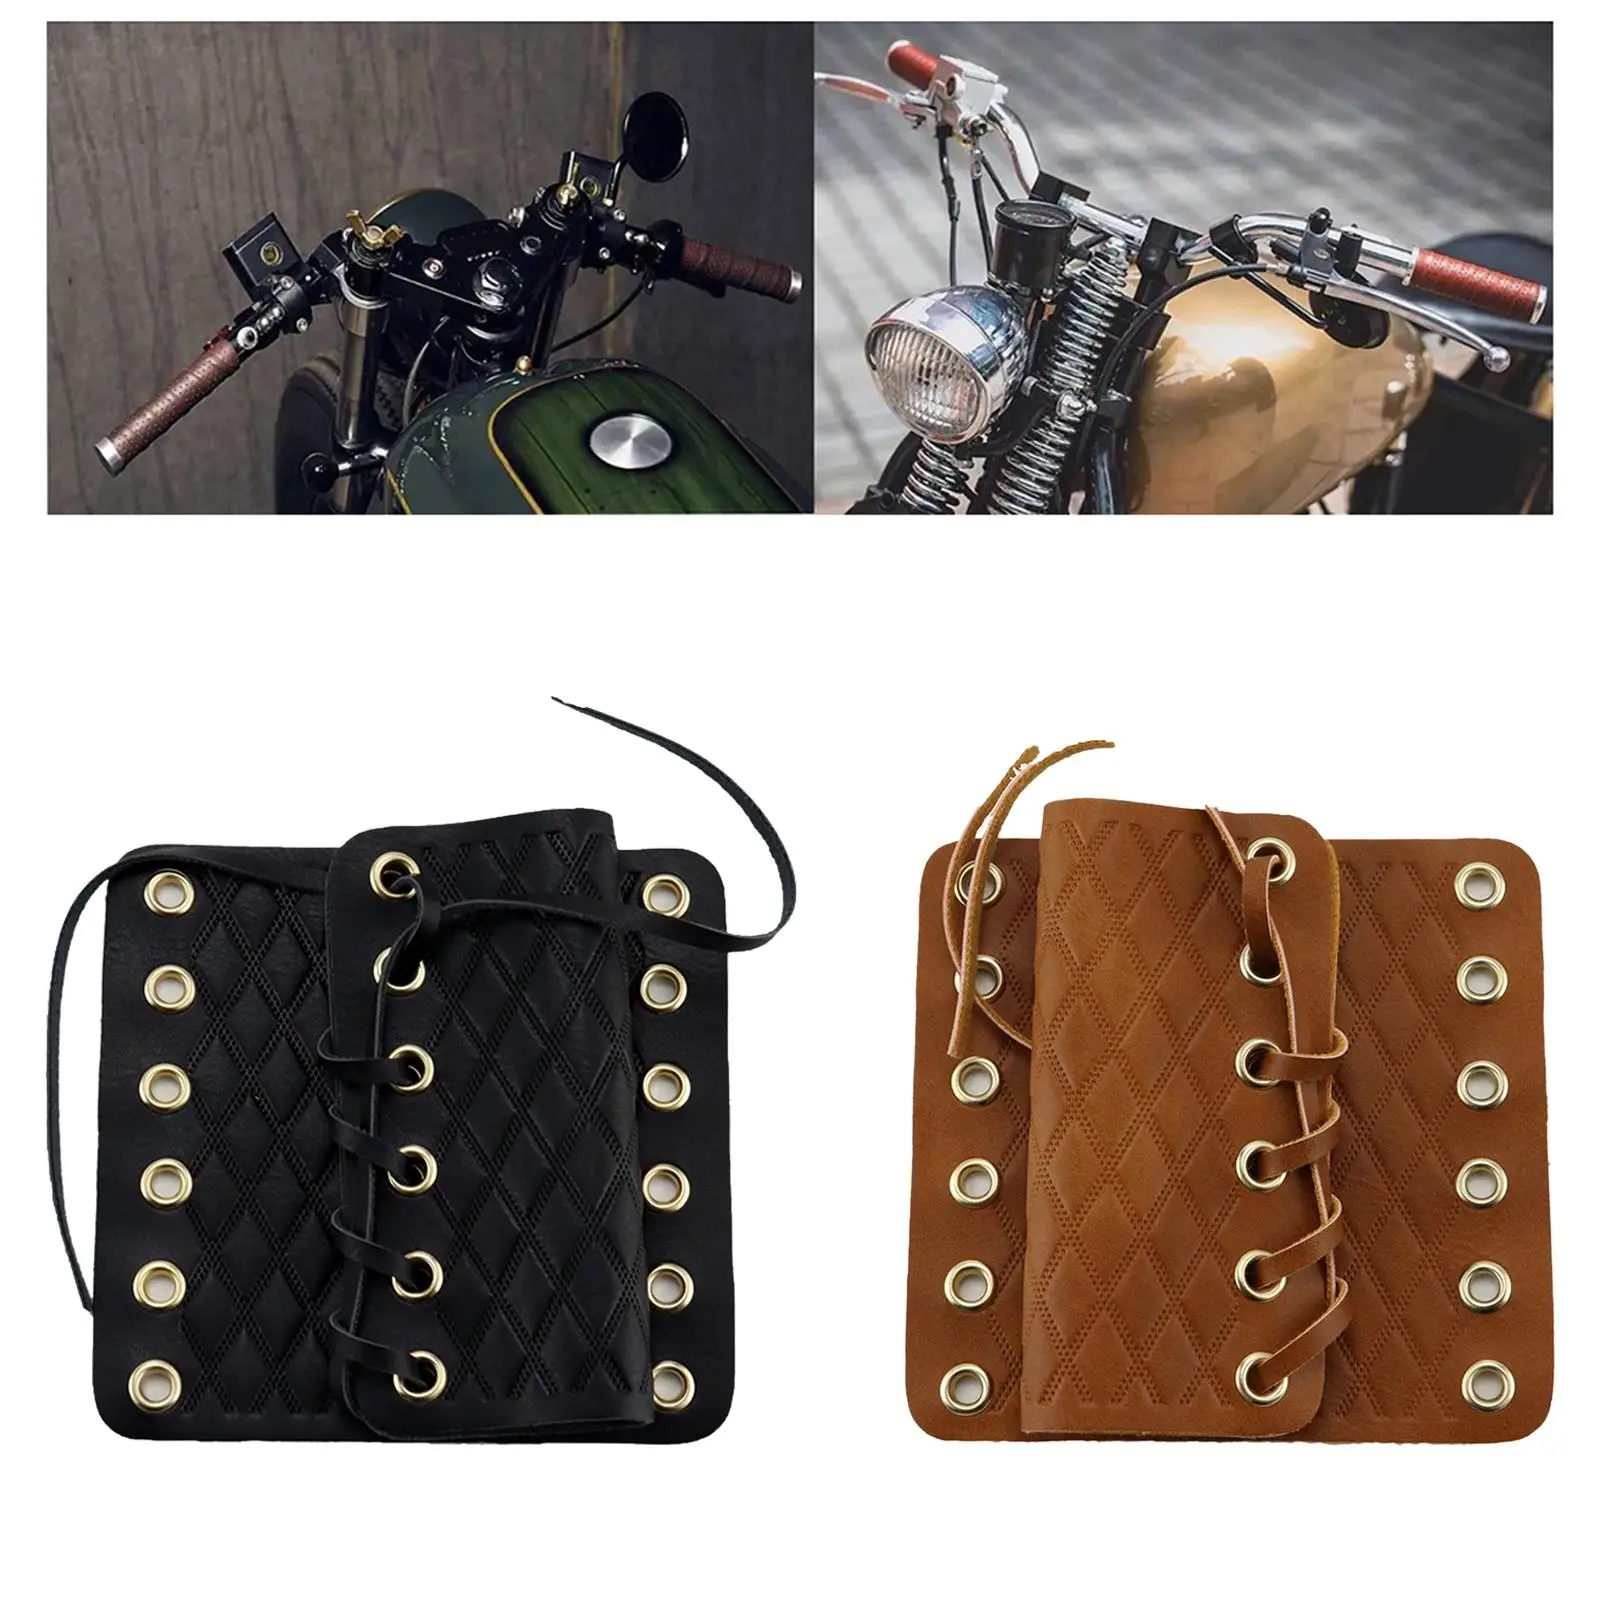 Universal Motorcycle Grip Covers Adjustable Straps Handlebar Wraps Shock Absorption for Most Motorbikes All Handgrips